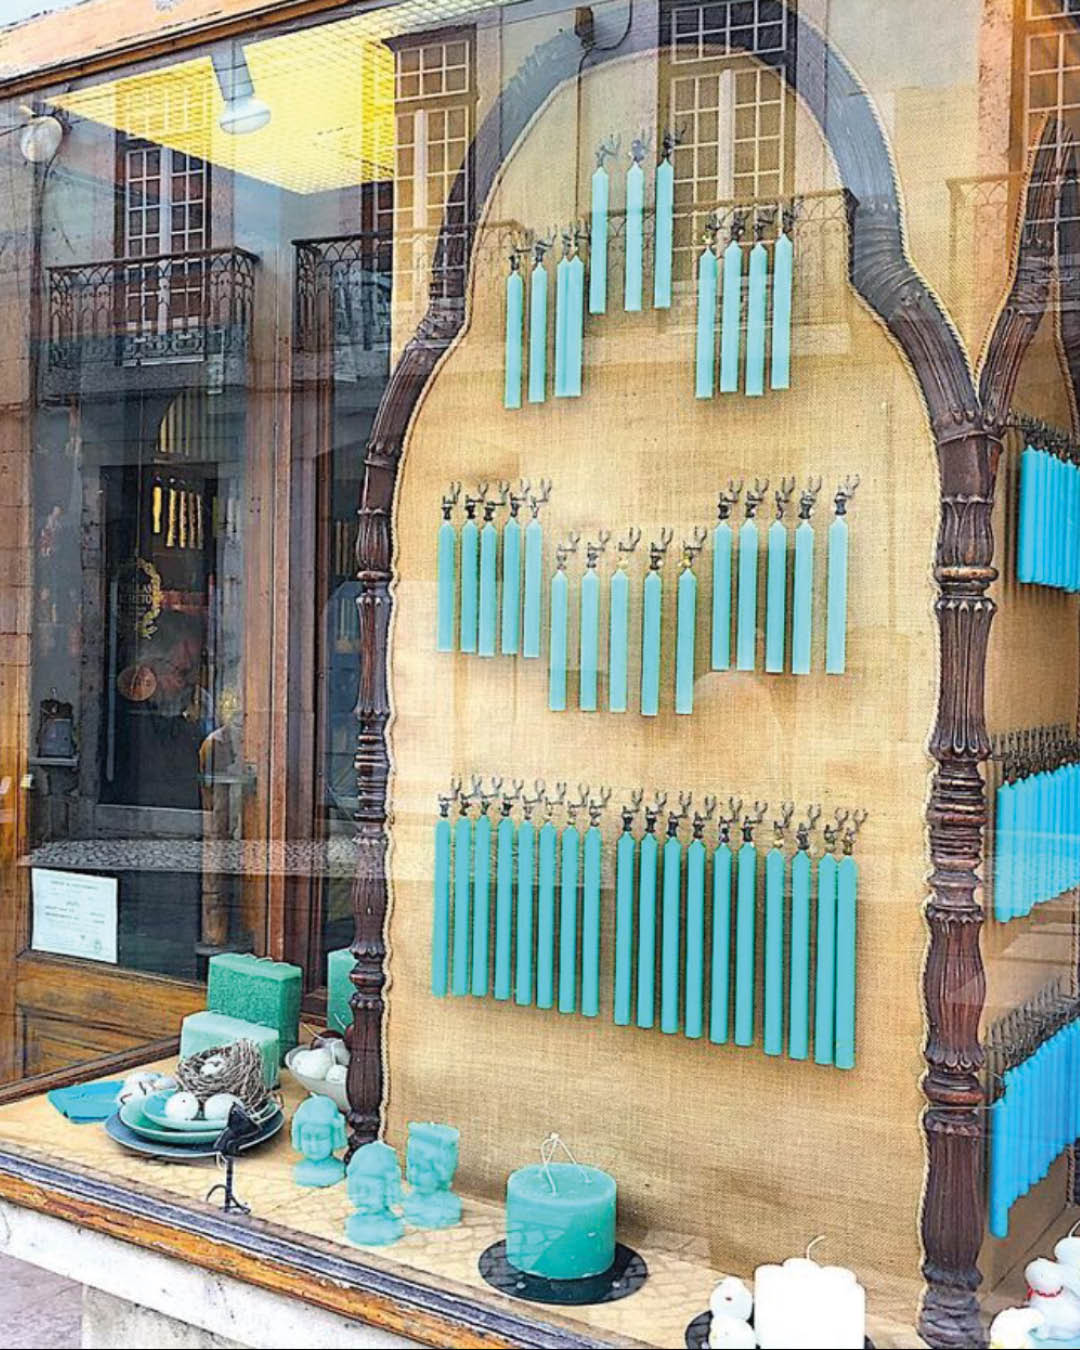 Blue votive candles hanging in a window display at Caza das Vellas Loreto.